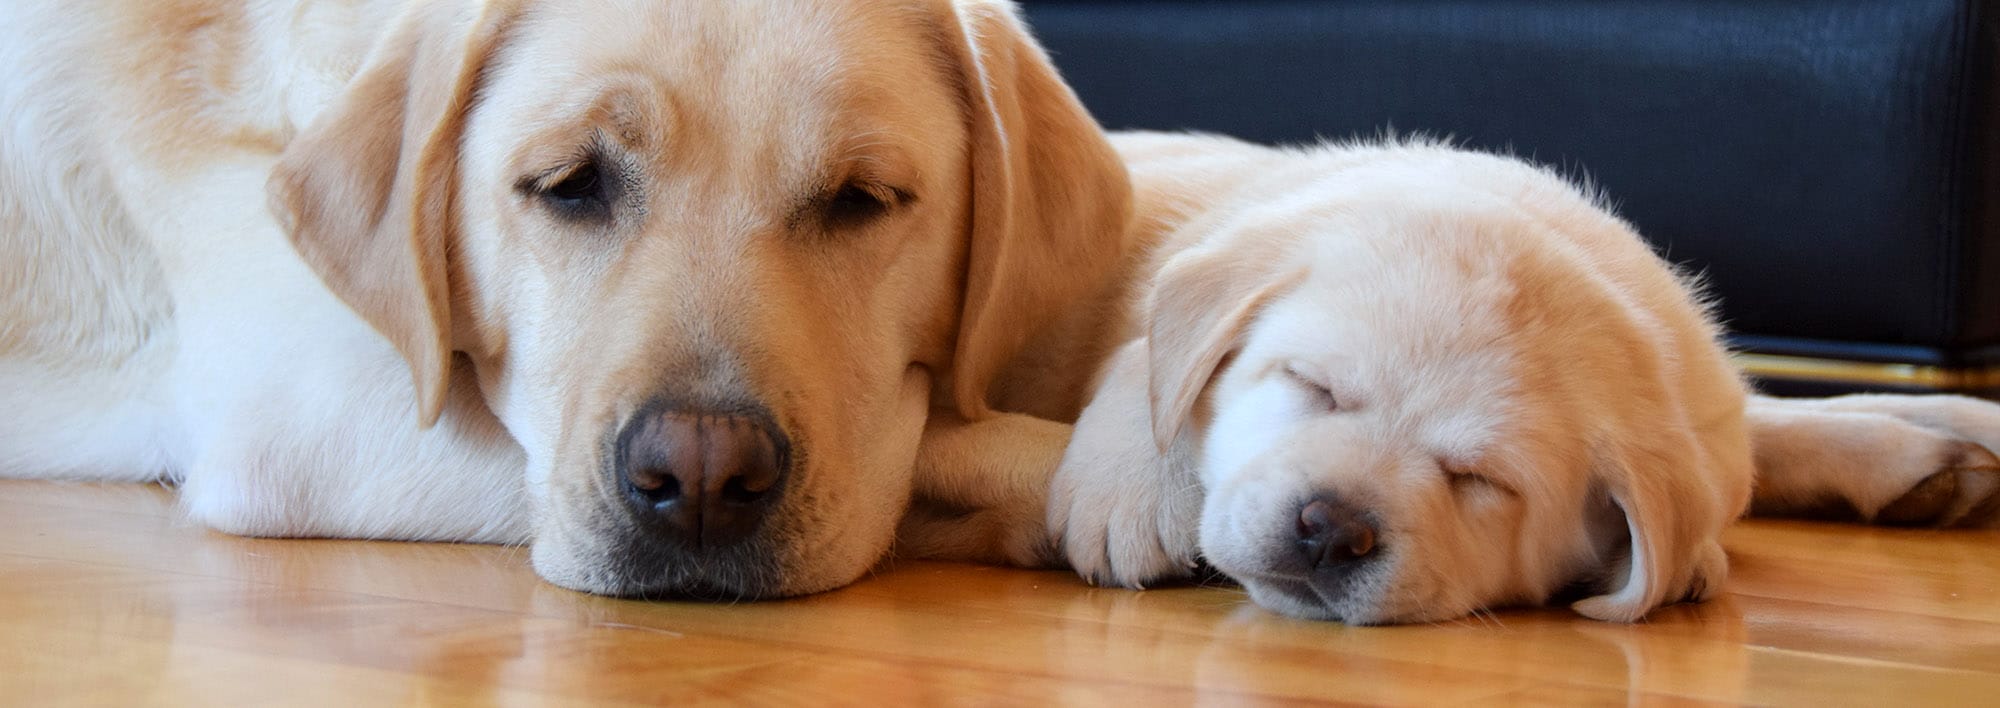 A yellow Labrador rests on a shiny wood floor with a young yellow Labrador puppy sleeping next to her